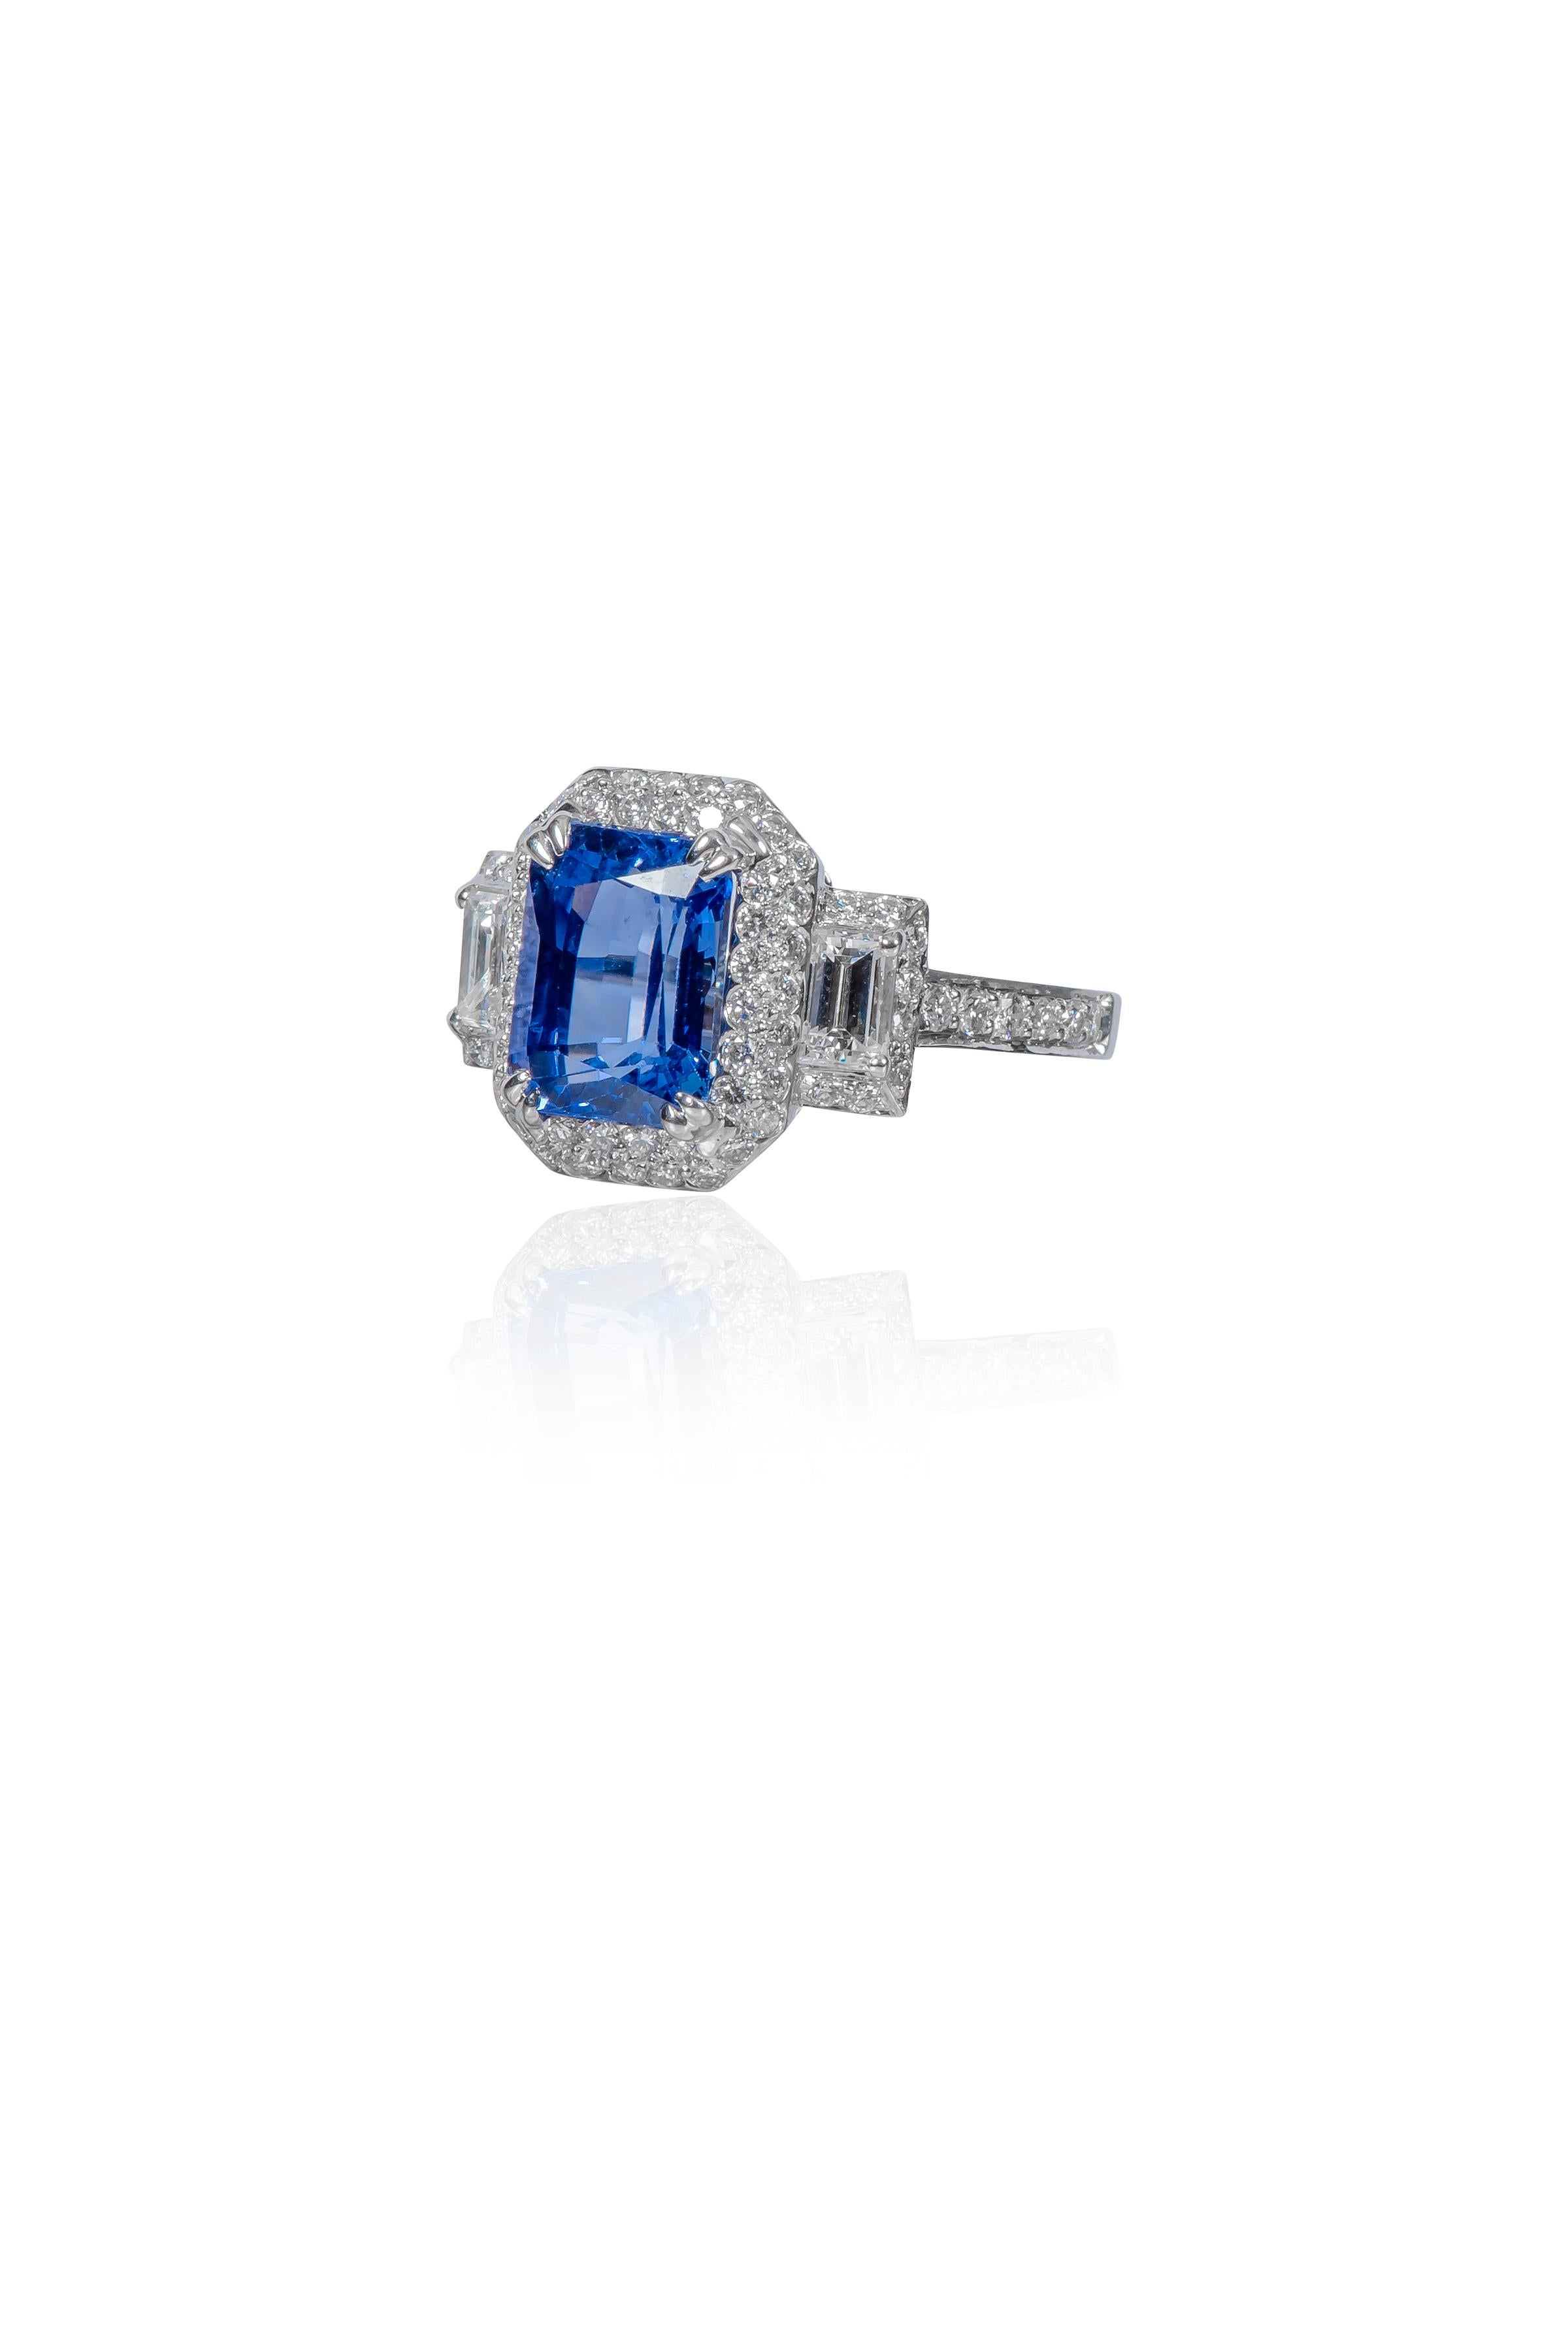 18 Karat White Gold 2.36 Carat Sapphire and Diamond Three-Stone Cluster Ring 

The elegantly designed 3-stone classic ring is defined by several distinct elements giving it a new form altogether. The radiant cornflower blue sapphire set in double